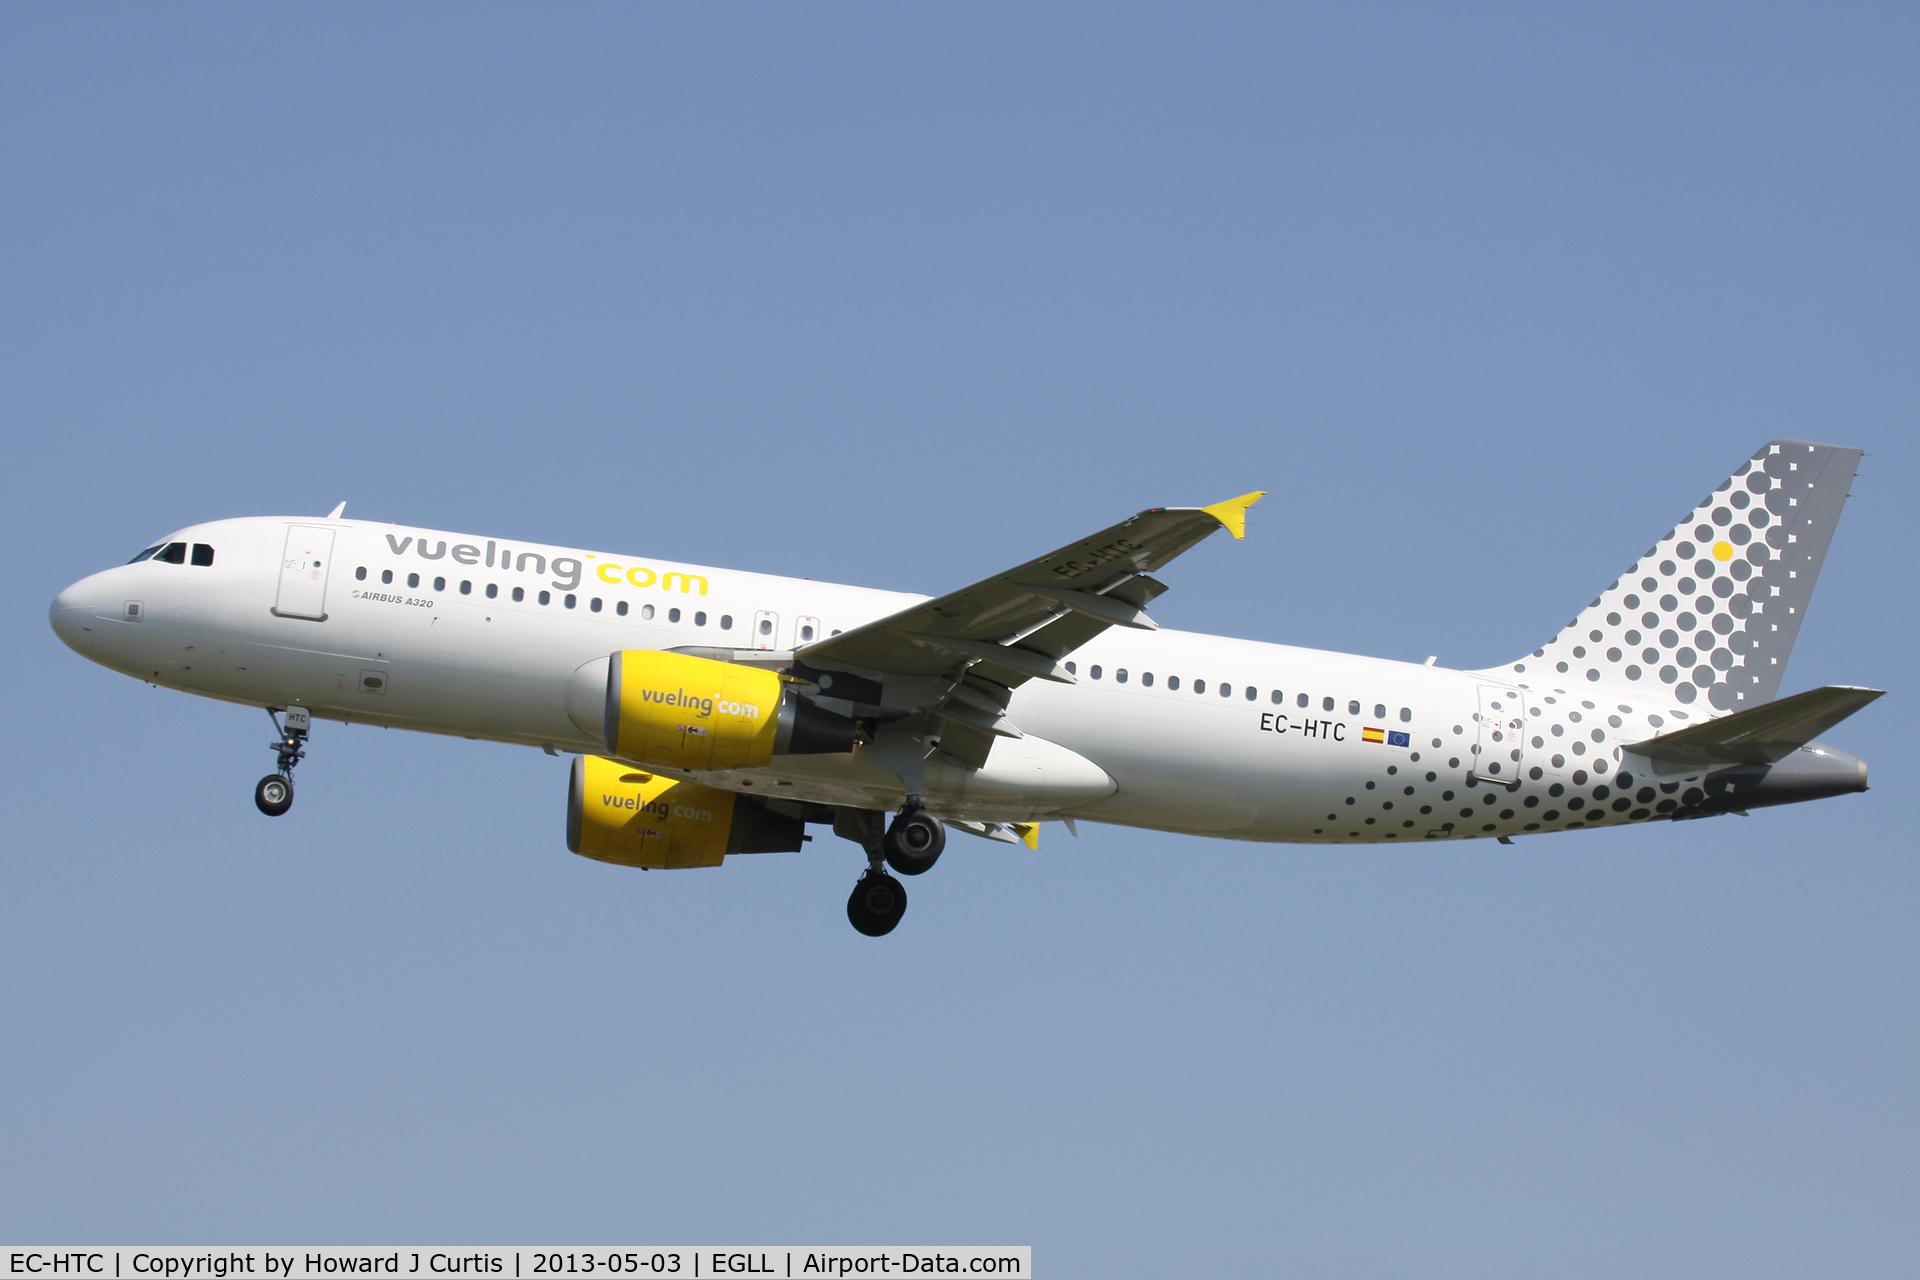 EC-HTC, 2001 Airbus A320-214 C/N 1540, Vueling, on finals for runway 27L.